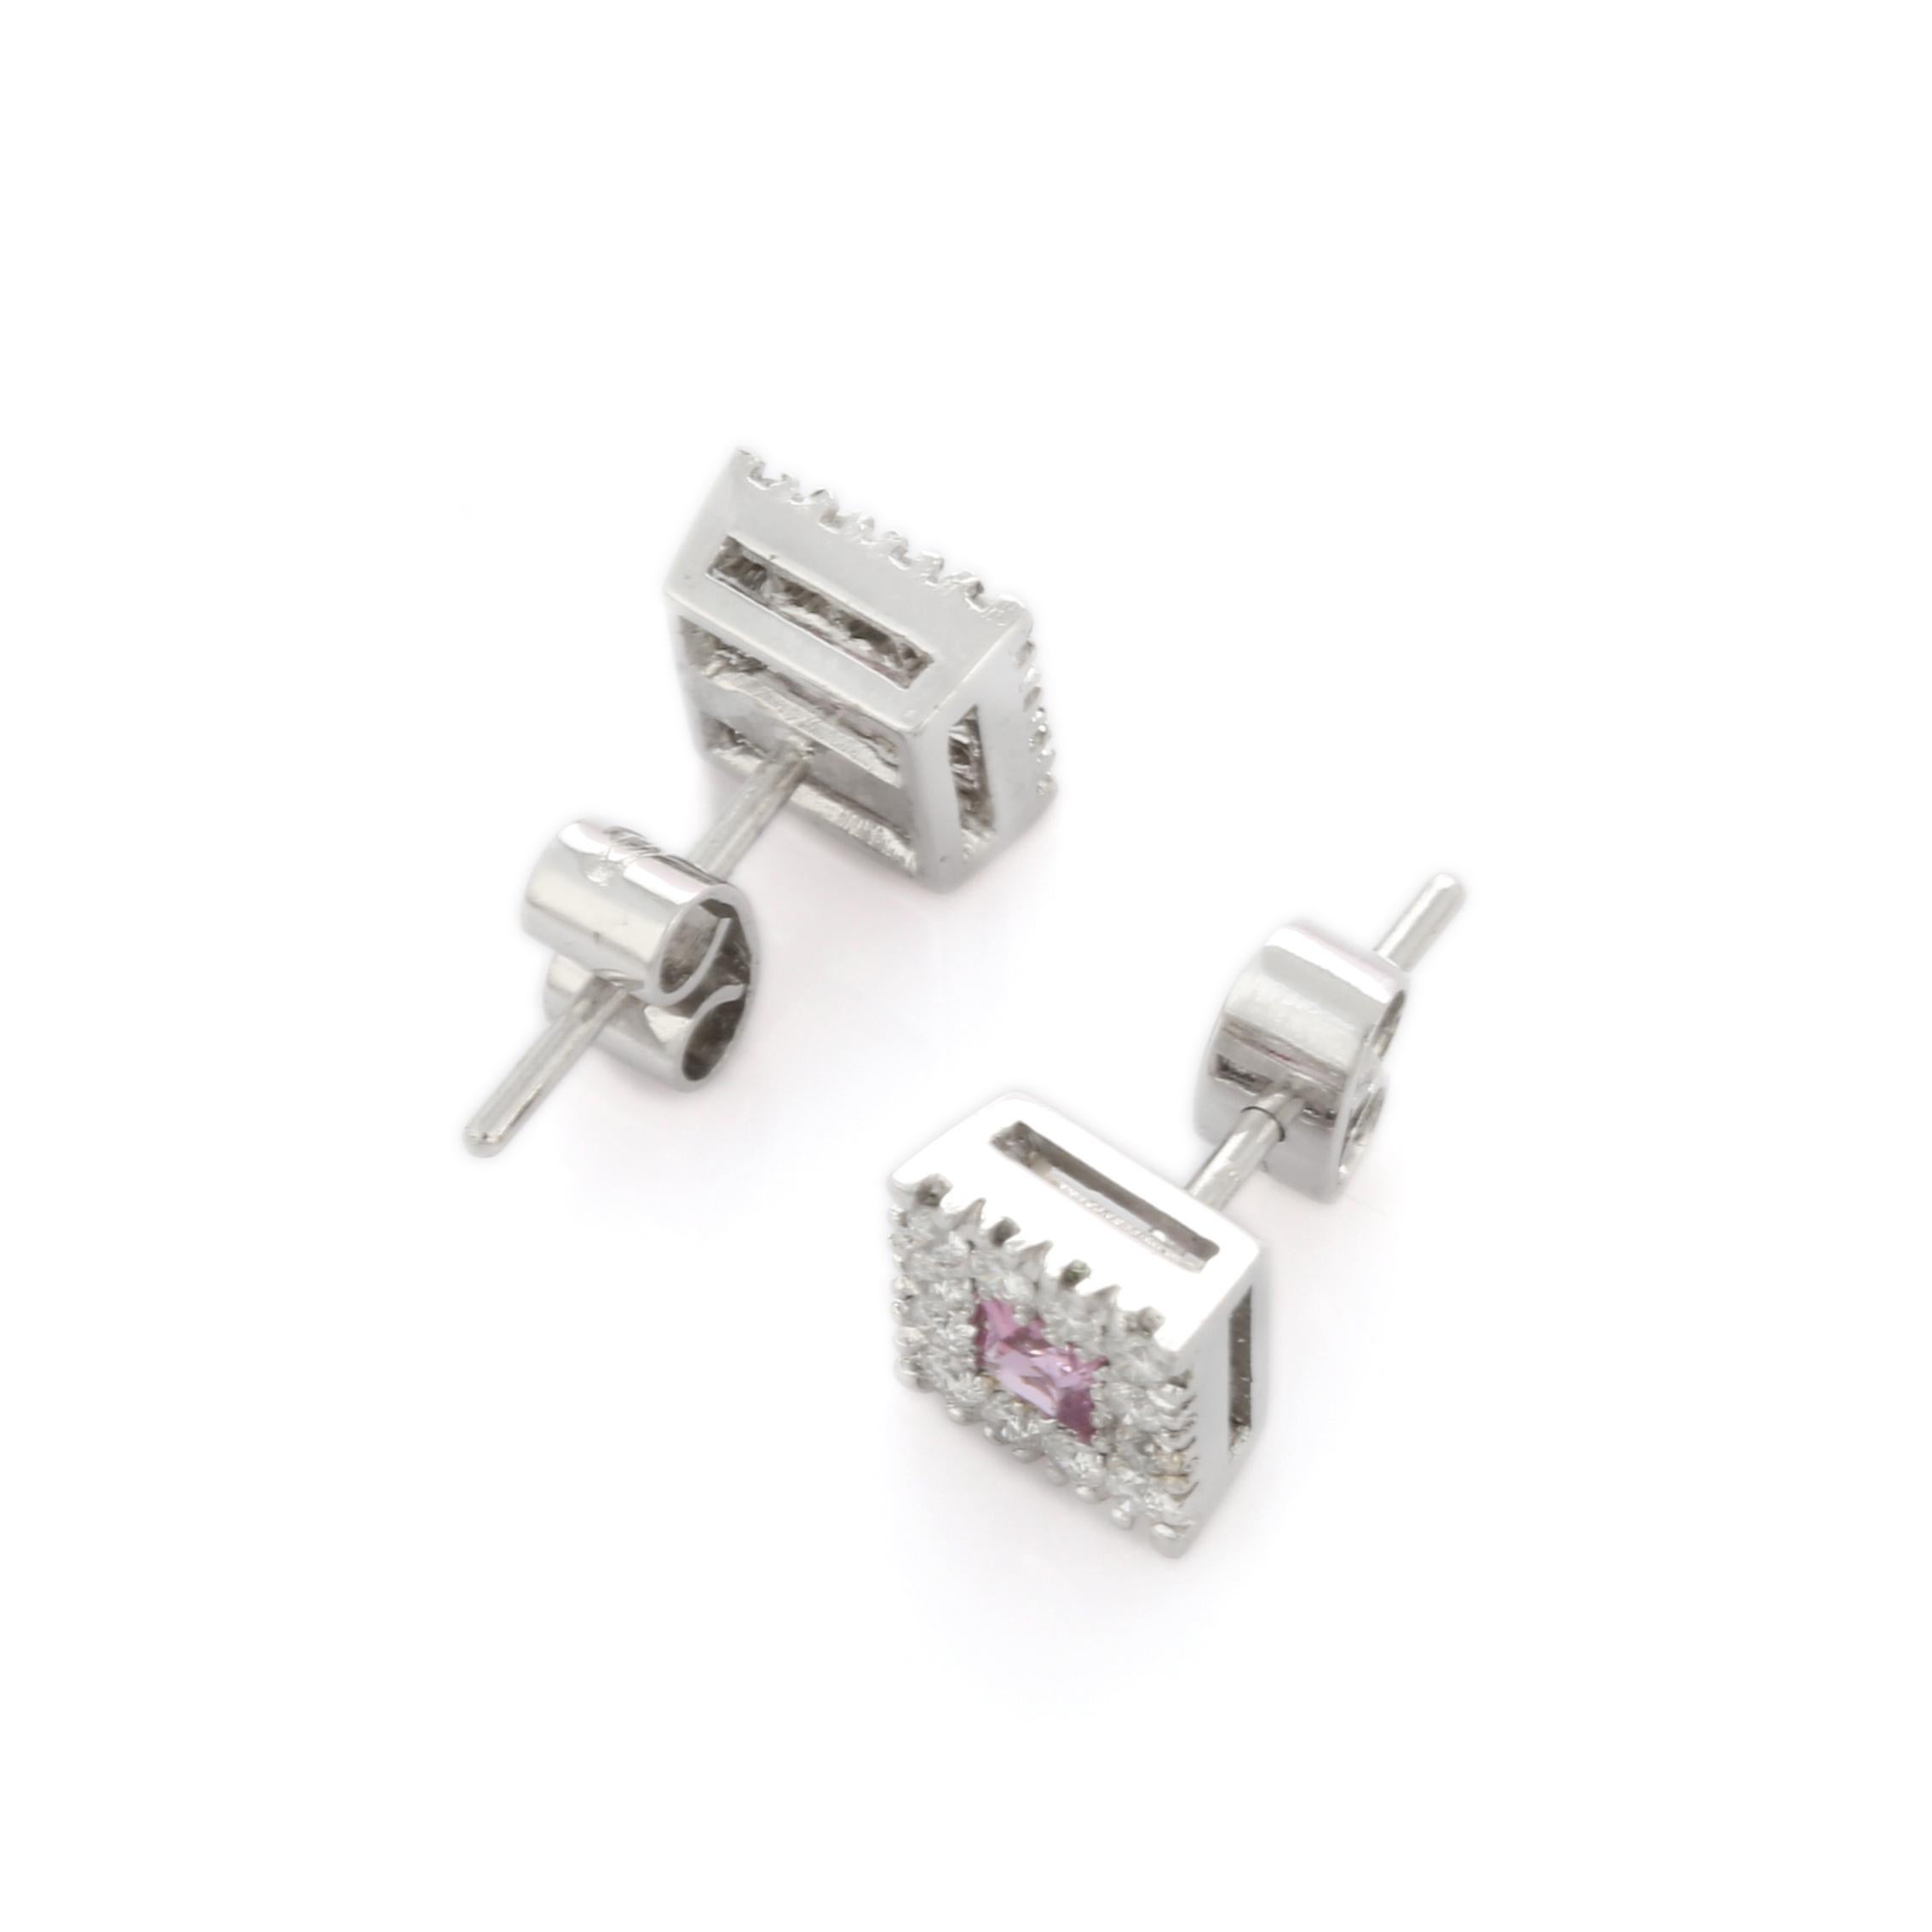 Studs create a subtle beauty while showcasing the colors of the natural precious gemstones and illuminating diamonds making a statement.

Square cut pink sapphire studs with diamonds in 18K gold. Embrace your look with these stunning pair of